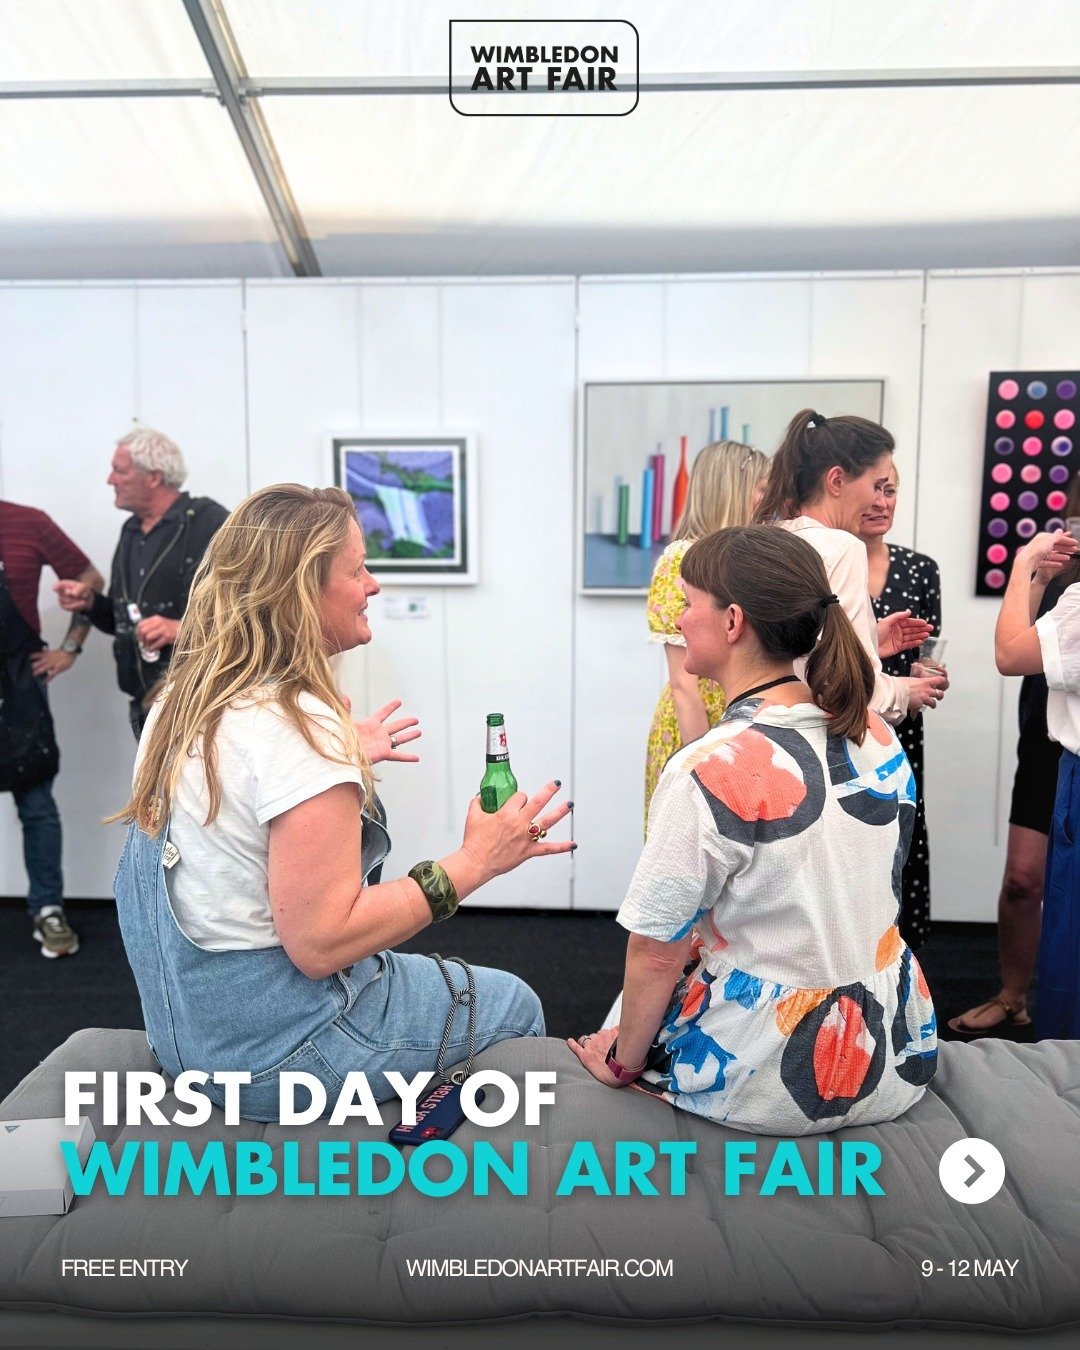 What a phenomenal start to the #WimbledonArtFair... ⬇️

Yesterday's grand launch exceeded all expectations, with a record-breaking number of art enthusiasts joining us to celebrate the unique talents of our artistic community - the 170 exhibiting art